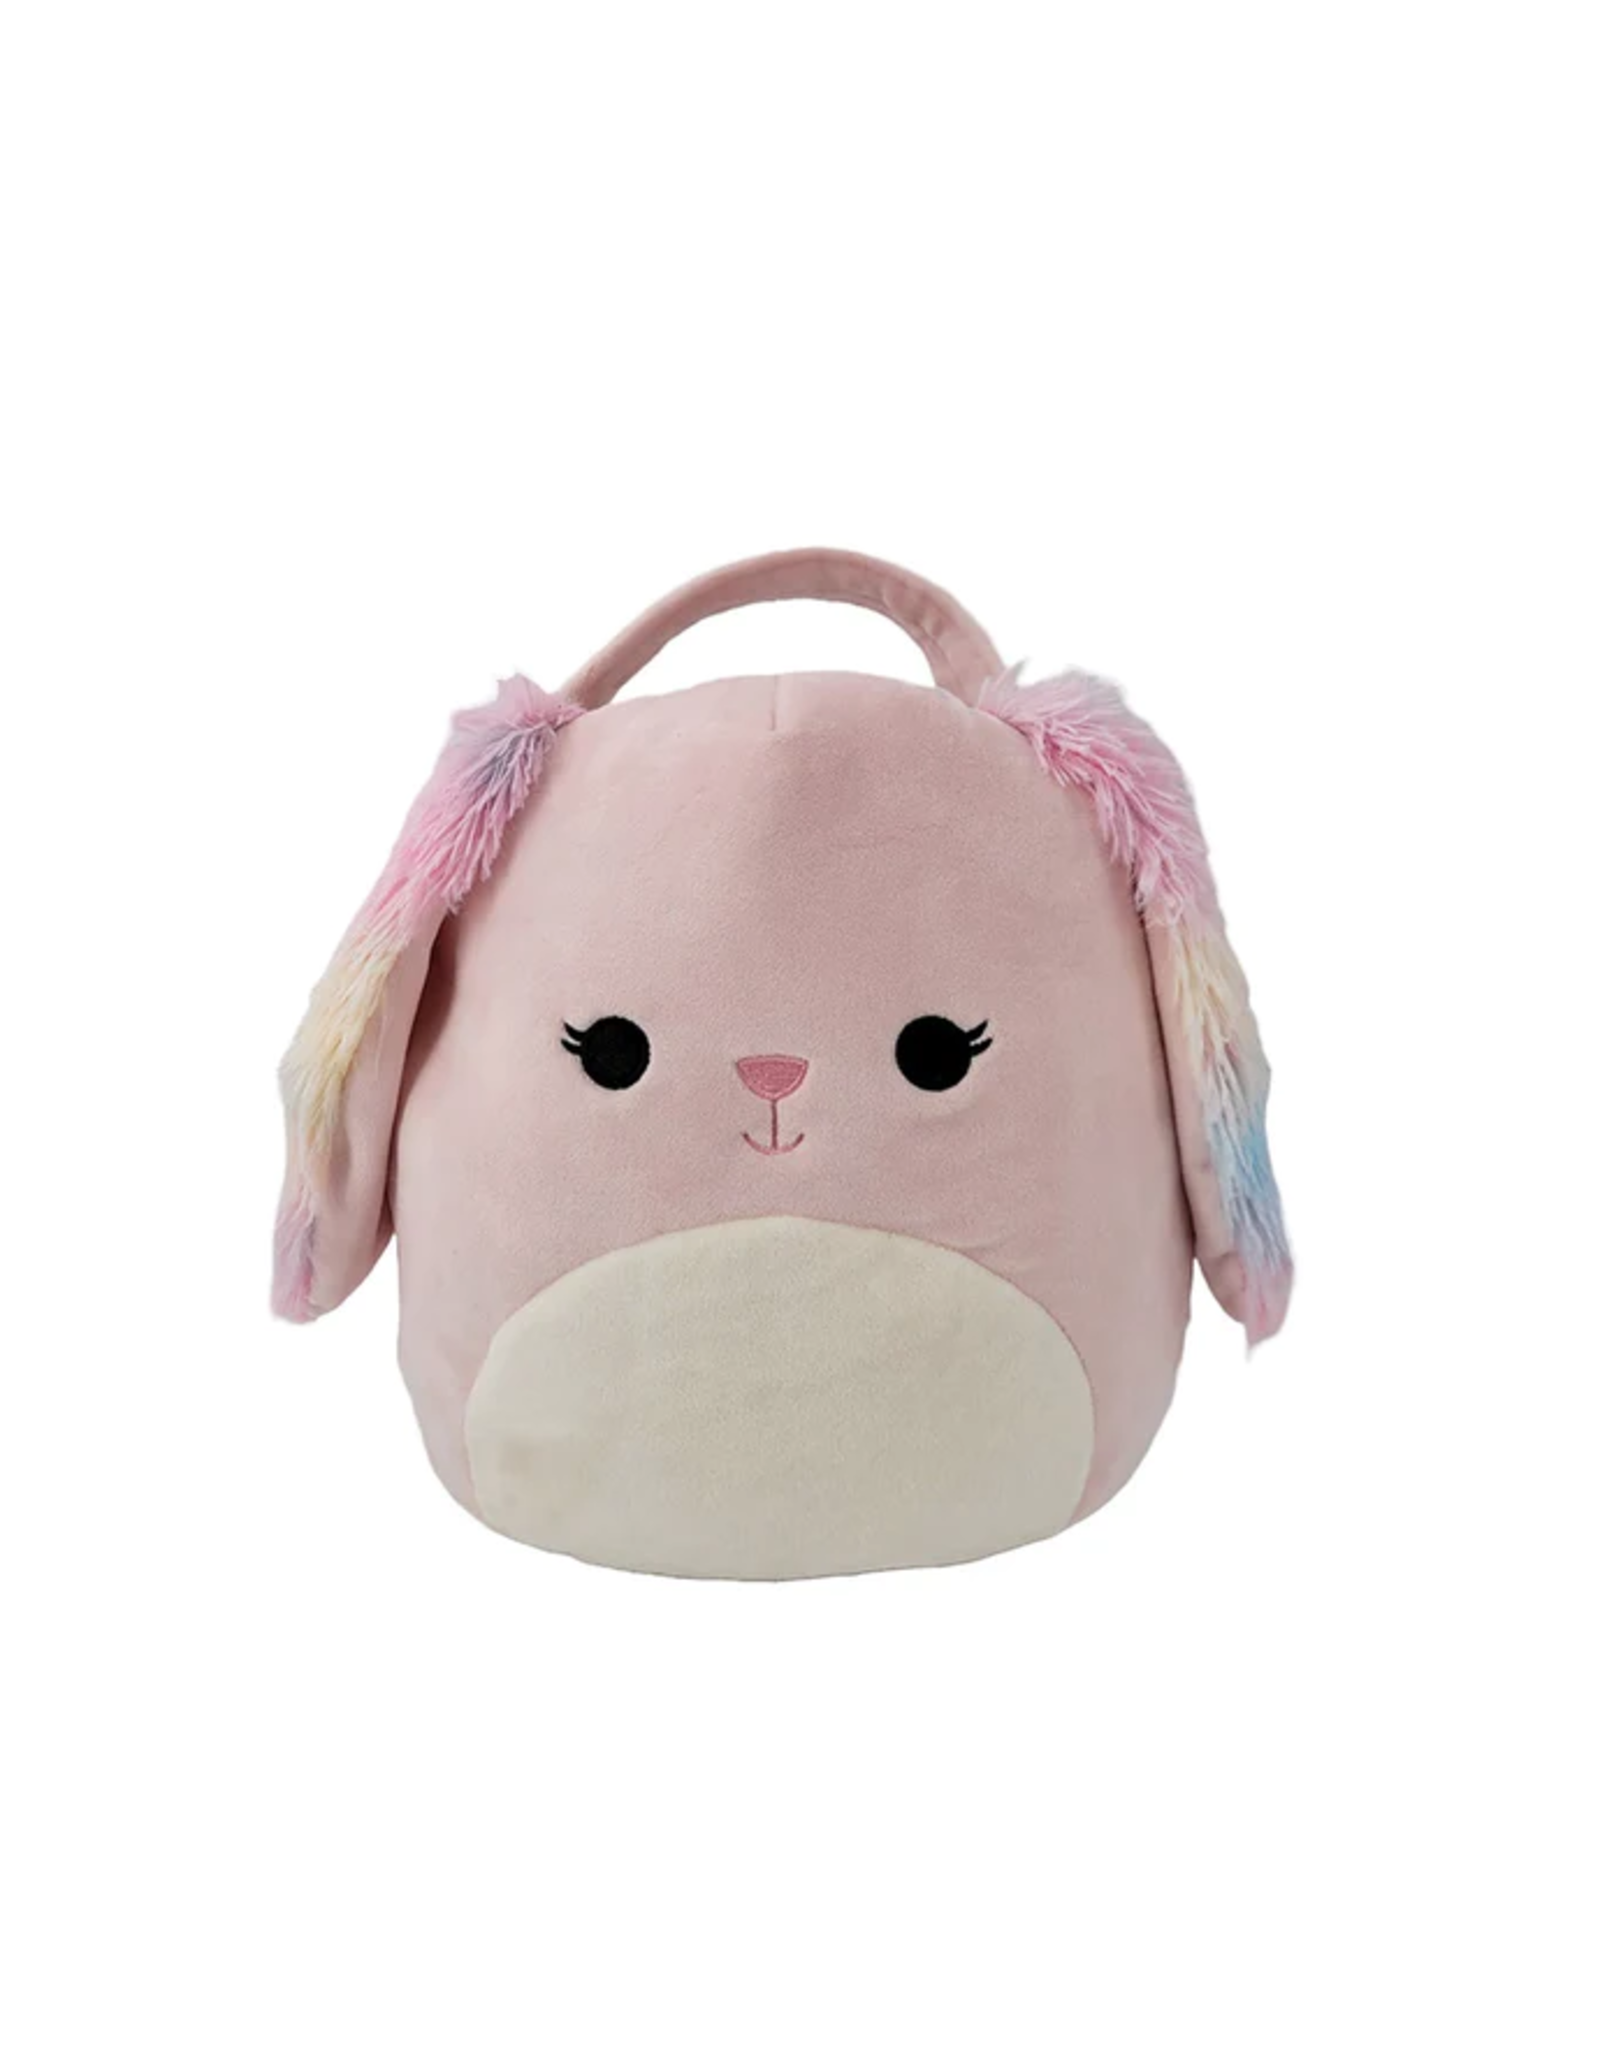 Squishmallows Squishmallows Easter Basket - Bop the Bunny